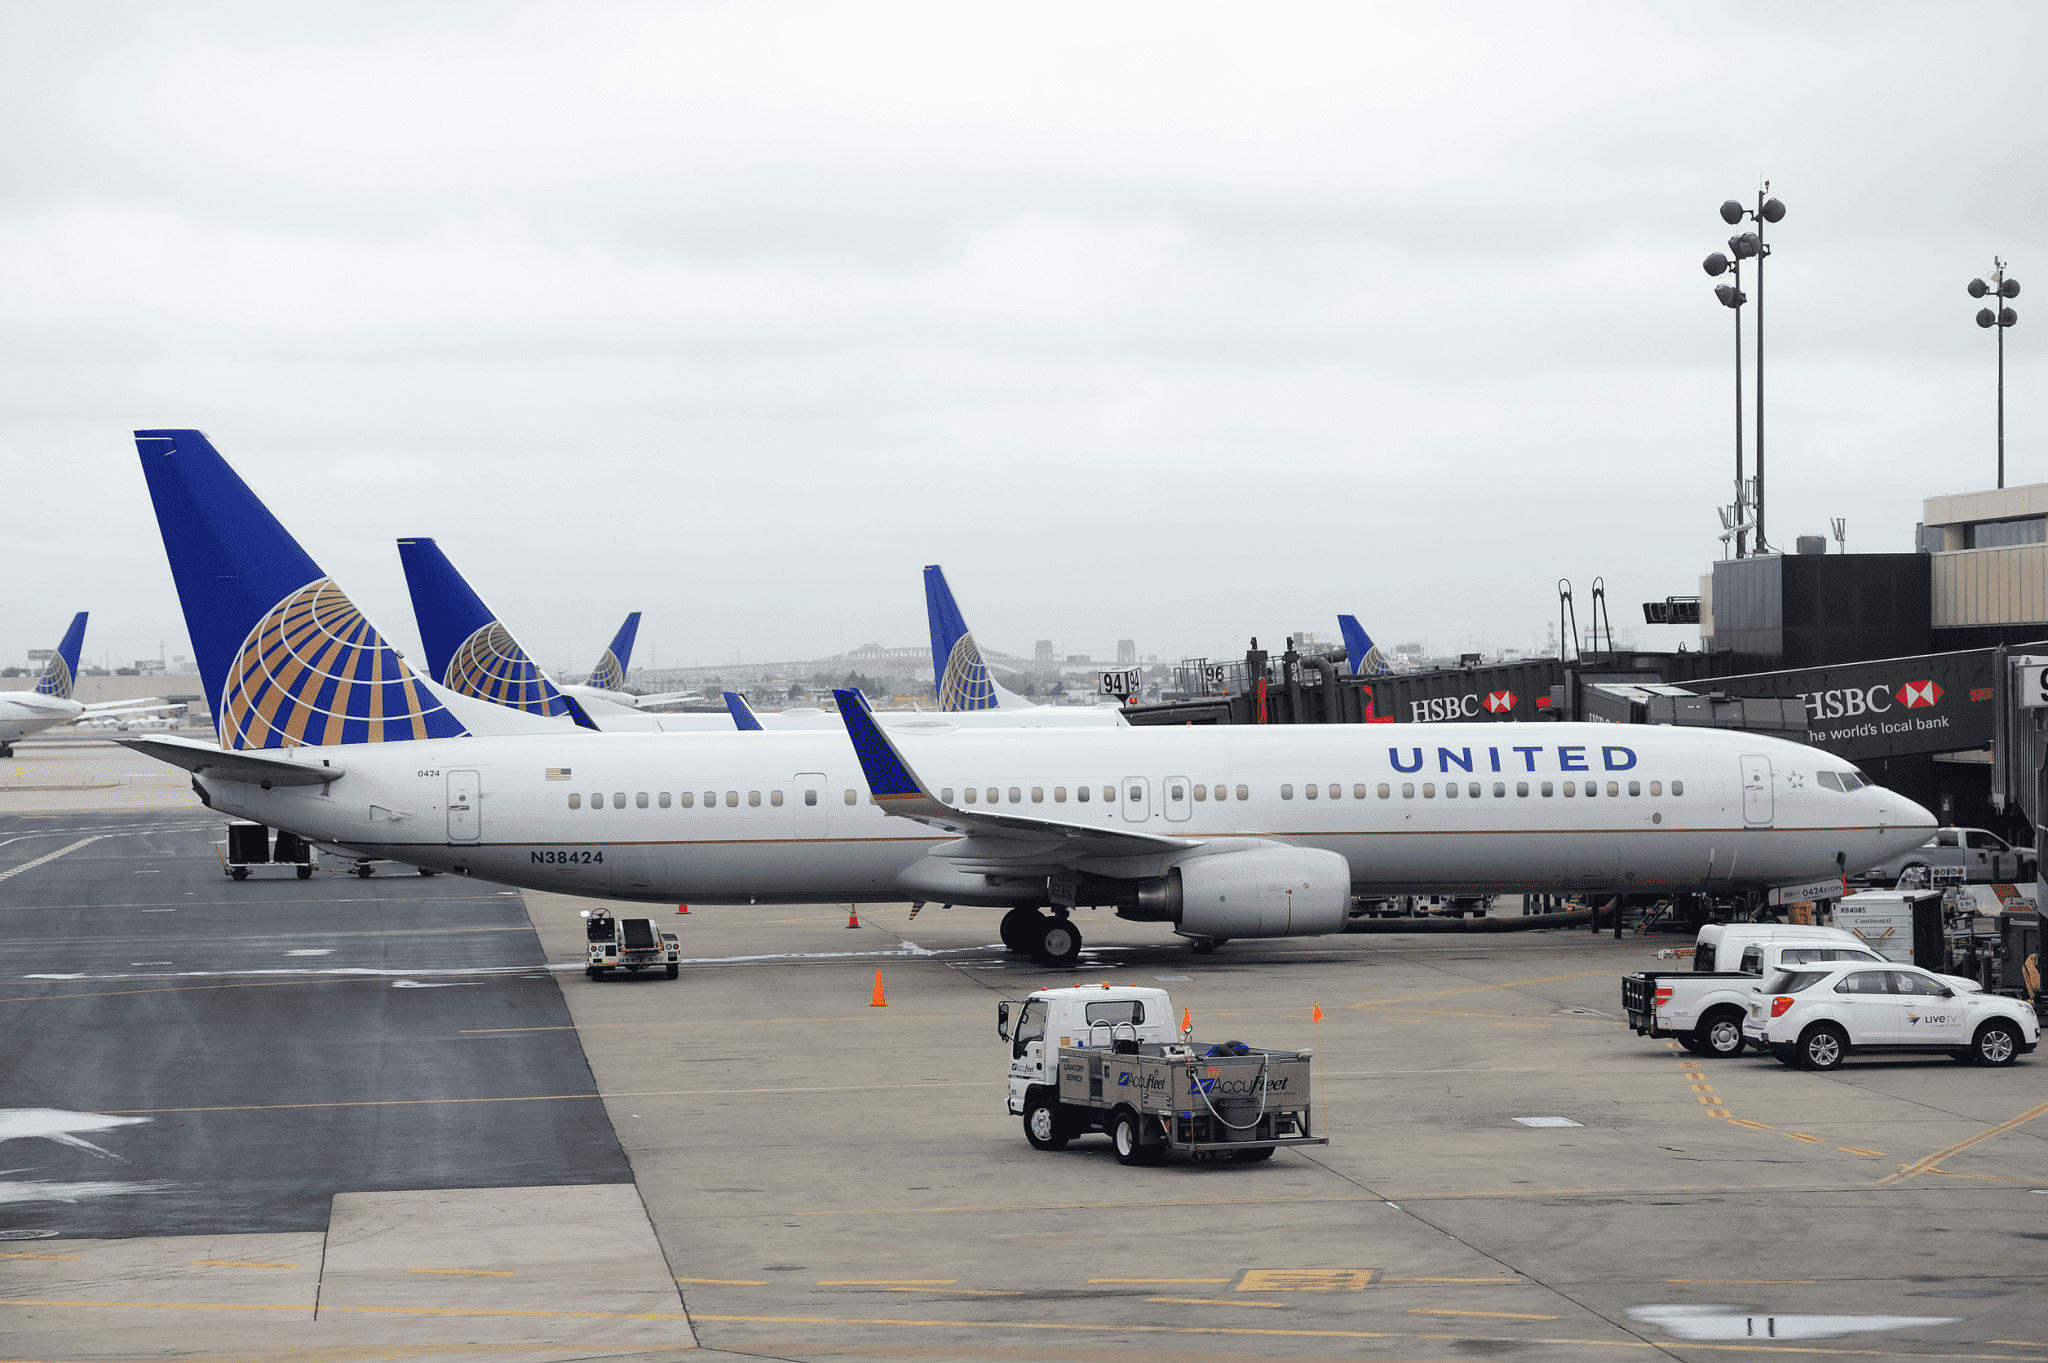 united airlines travel insurance worth it